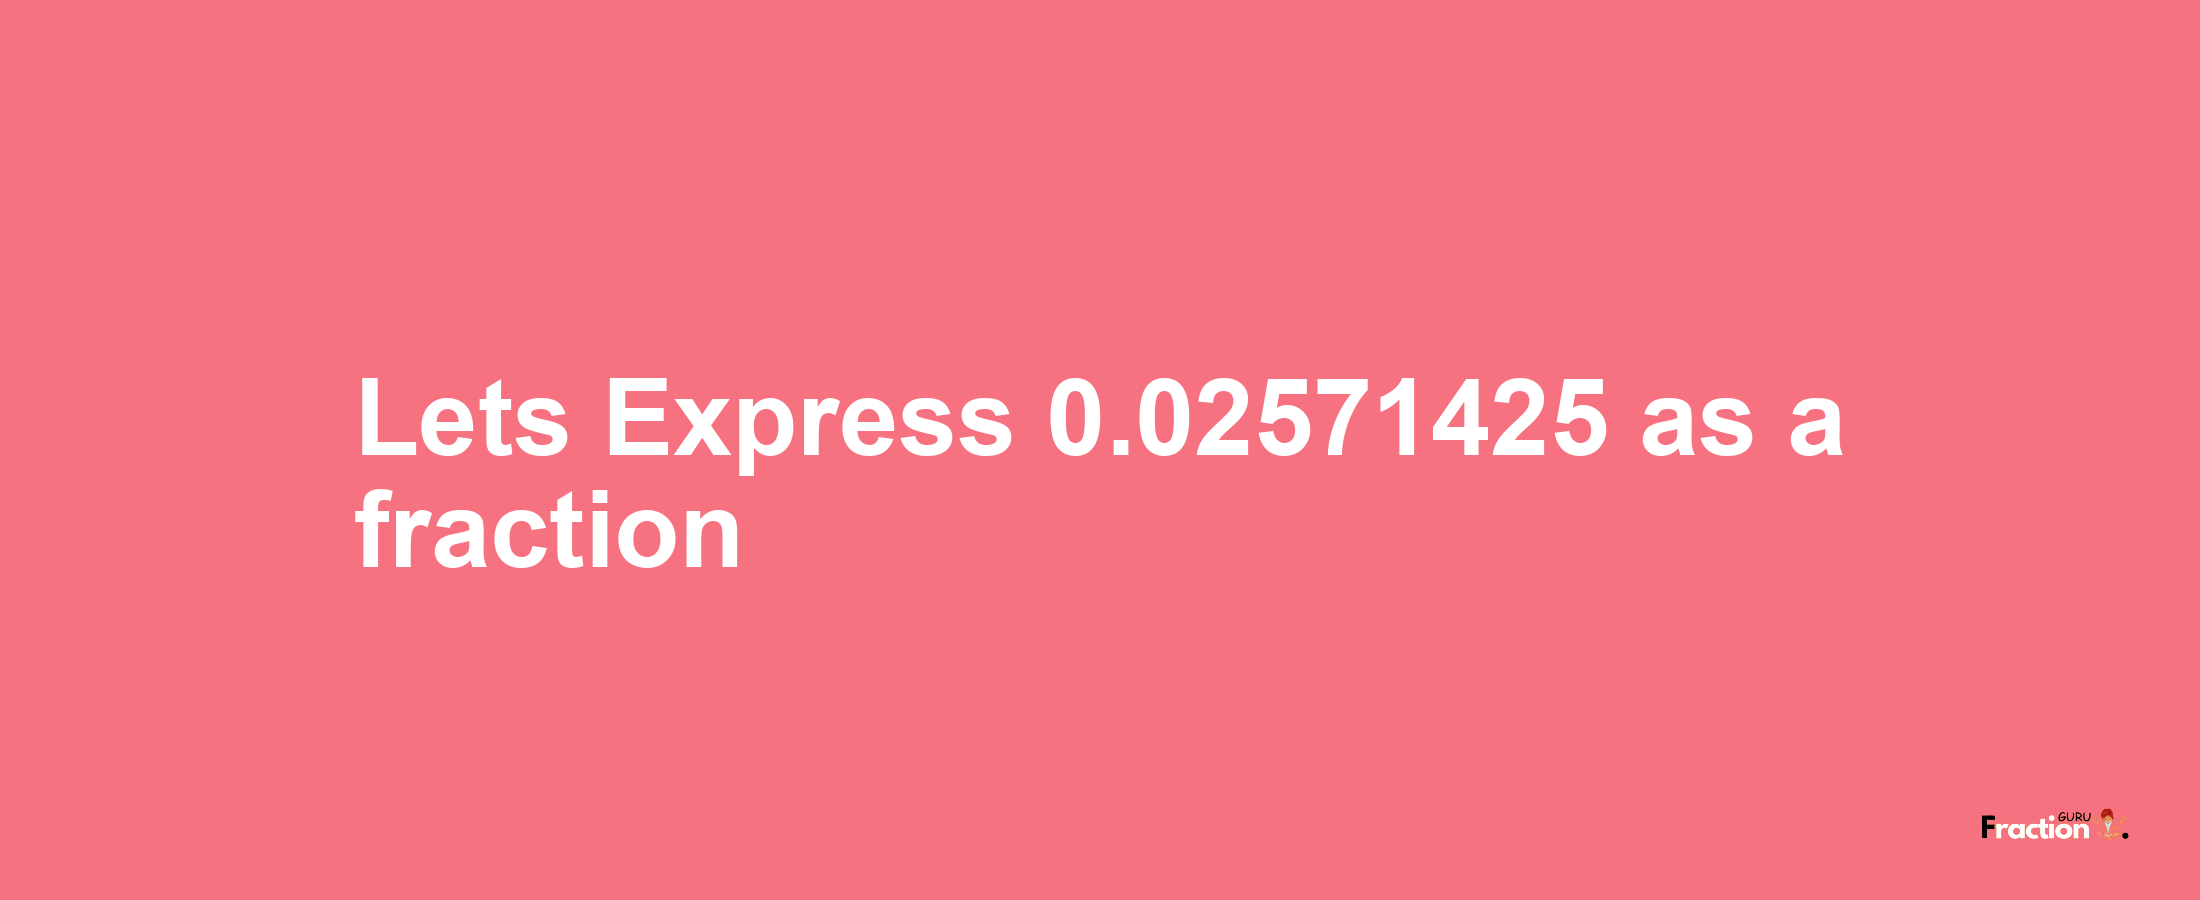 Lets Express 0.02571425 as afraction